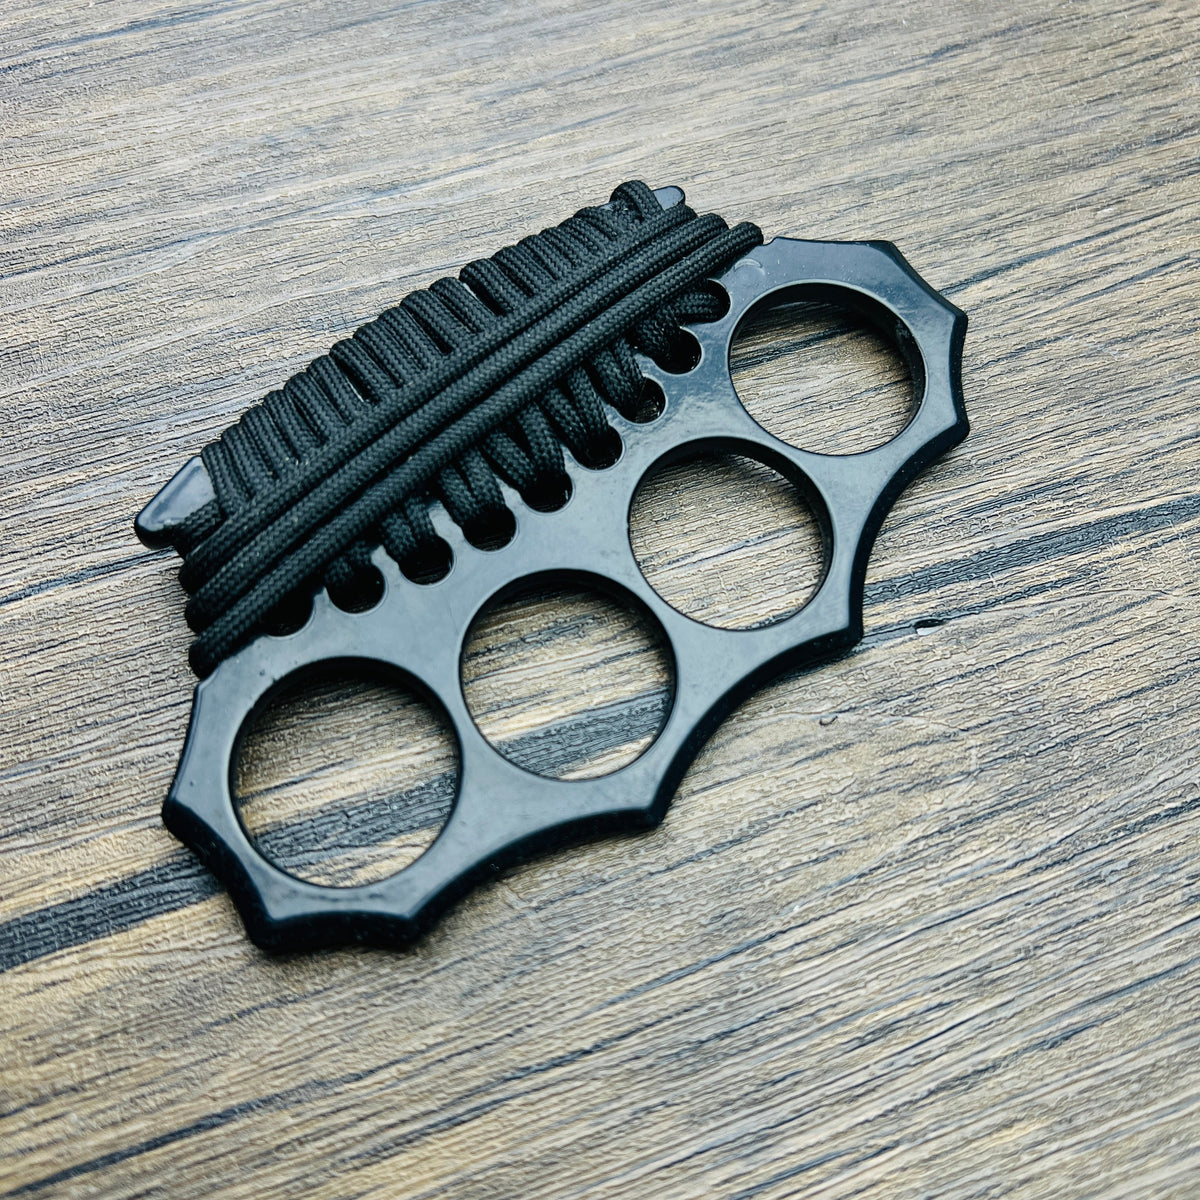 Guardian Self Defense Brass Knuckles With Paracord | Blade City